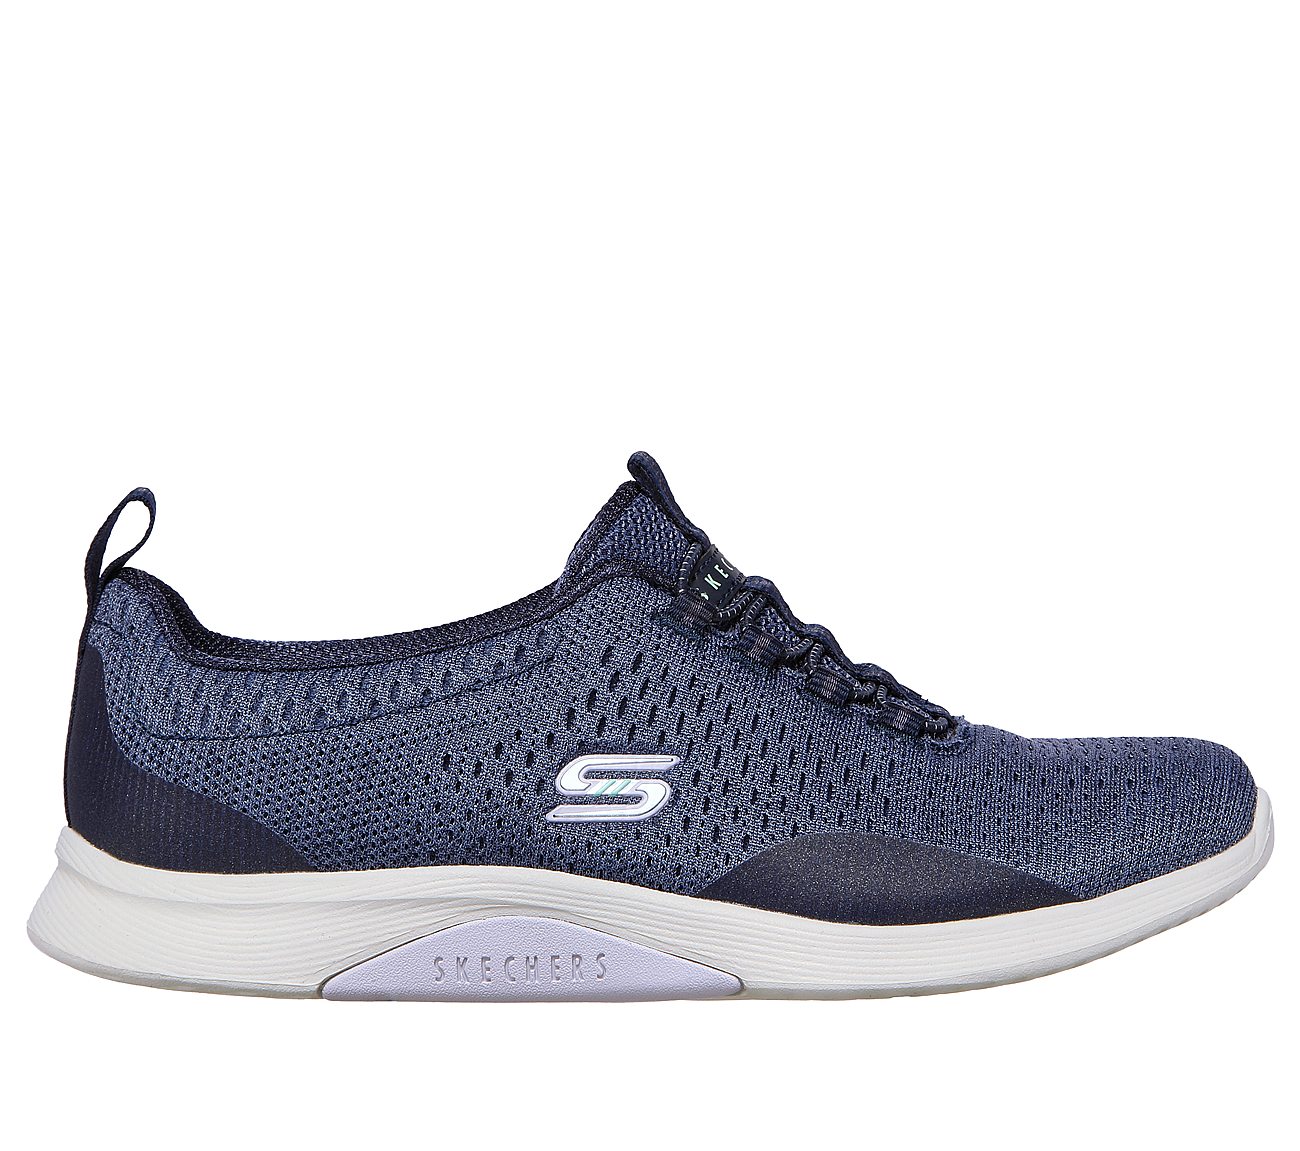 ESLA - FINE MOMENT, NAVY/LAVENDER Footwear Lateral View